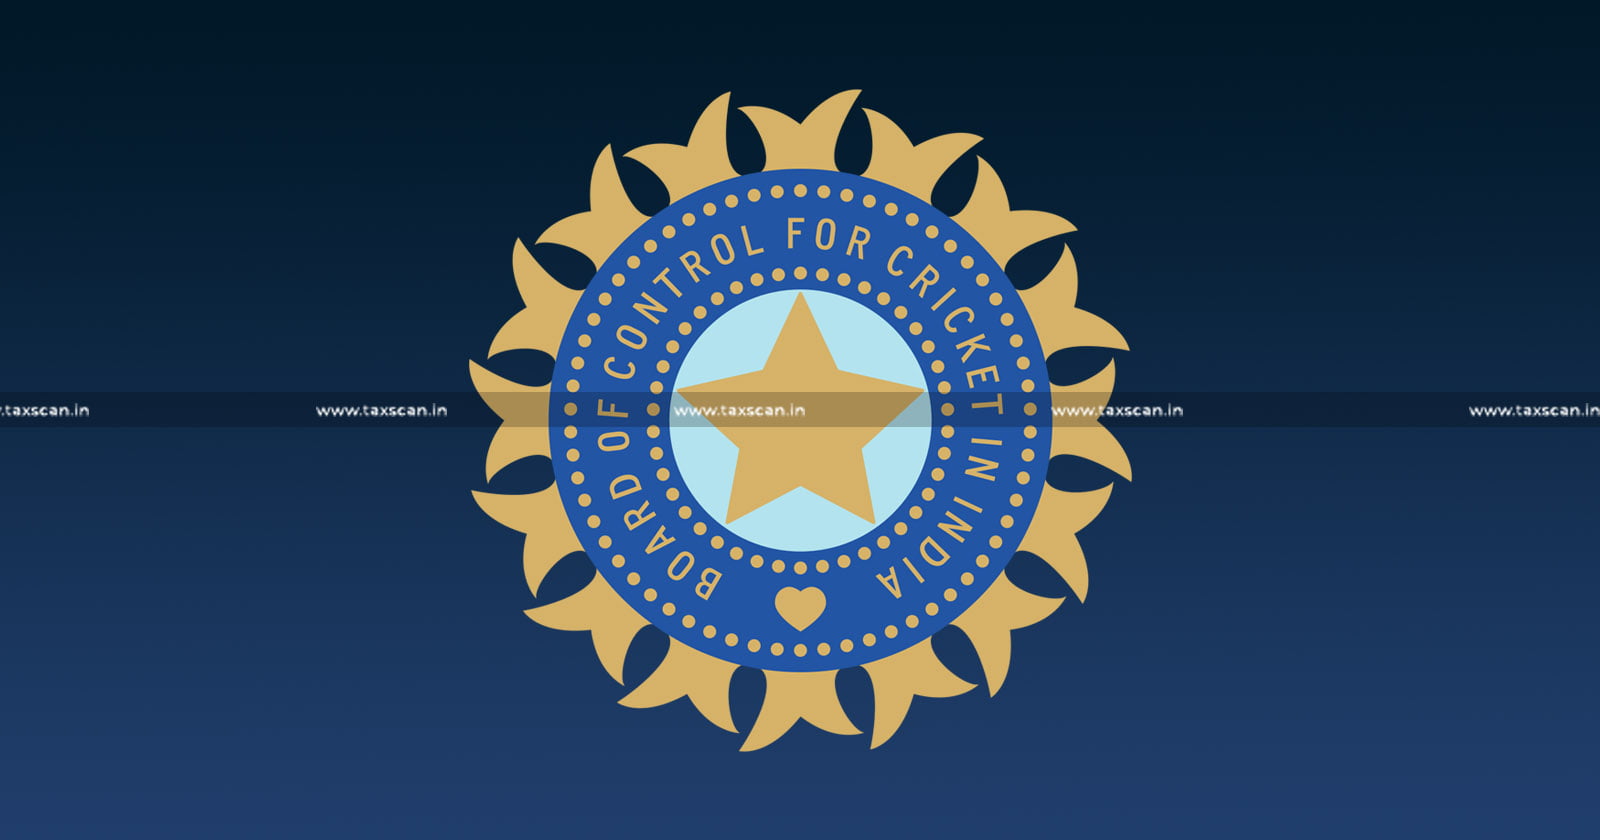 BCCI to CSA - Compensation - Compensation paid - BCCI - CSA - taxable - Termination Agreement - India-South Africa DTAA - DTAA - ITAT - Income Tax - taxscan